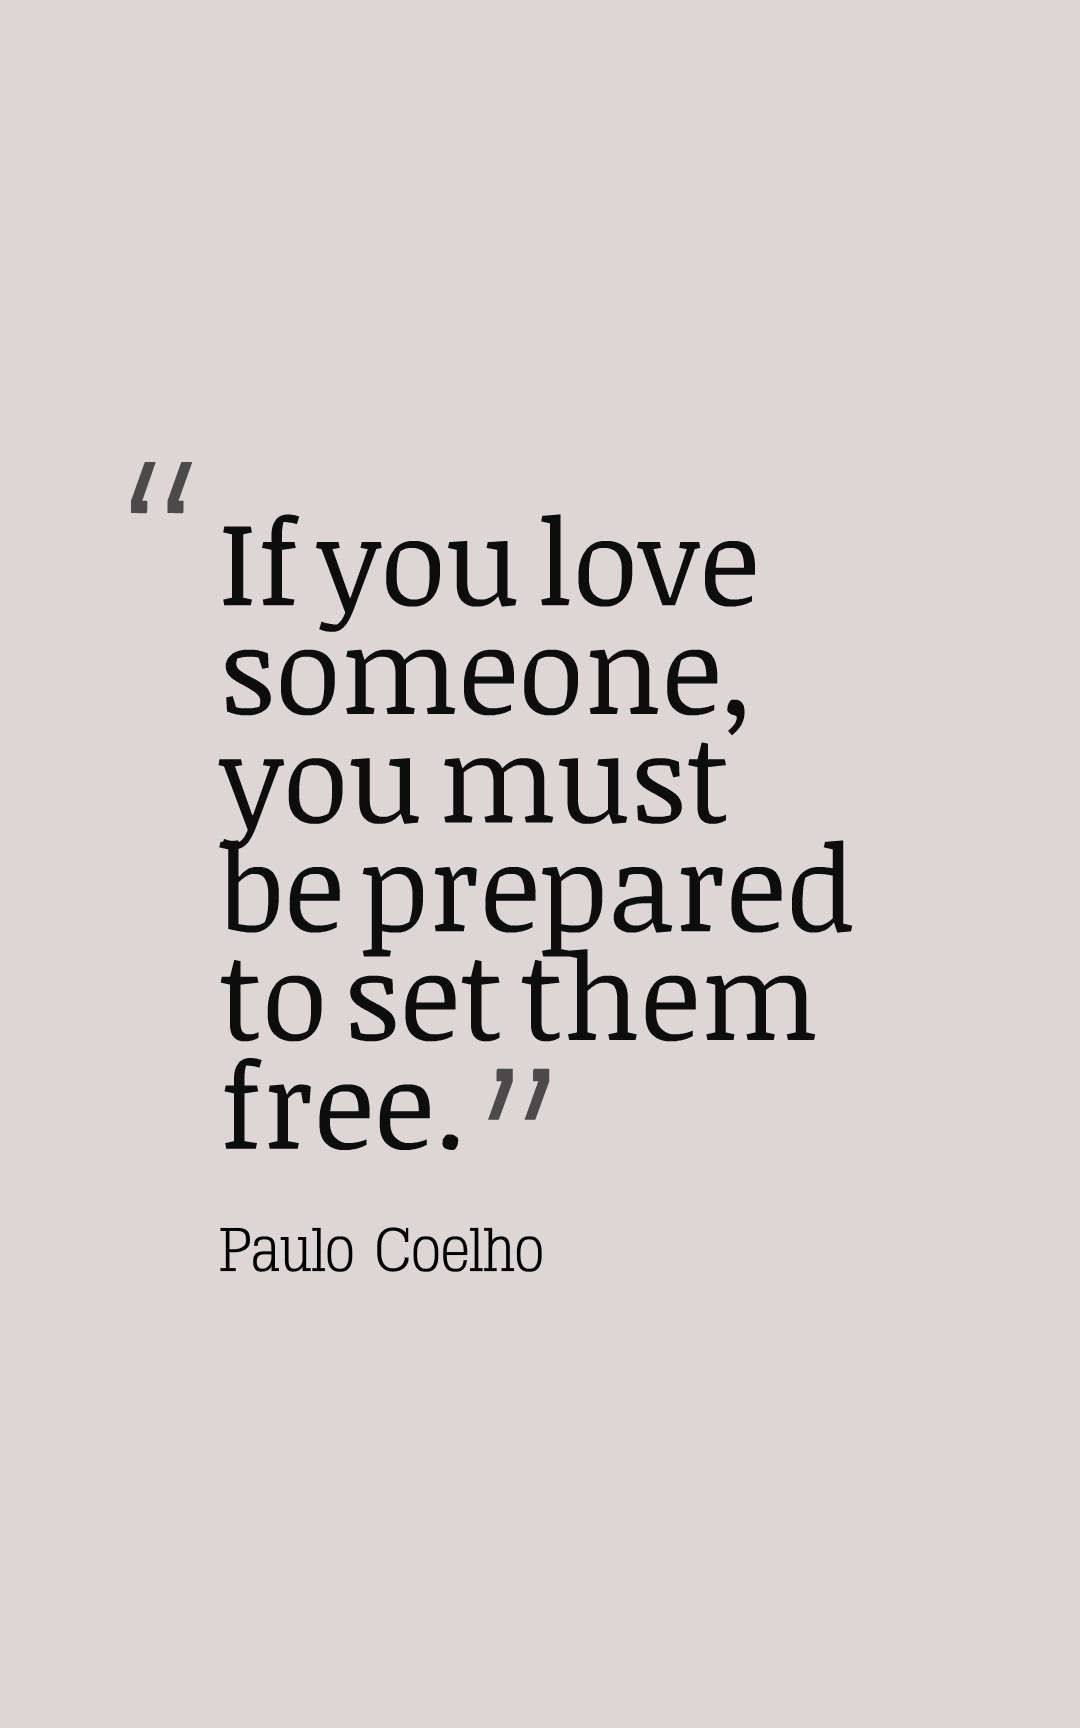 If you love someone, you must be prepared to set them free.